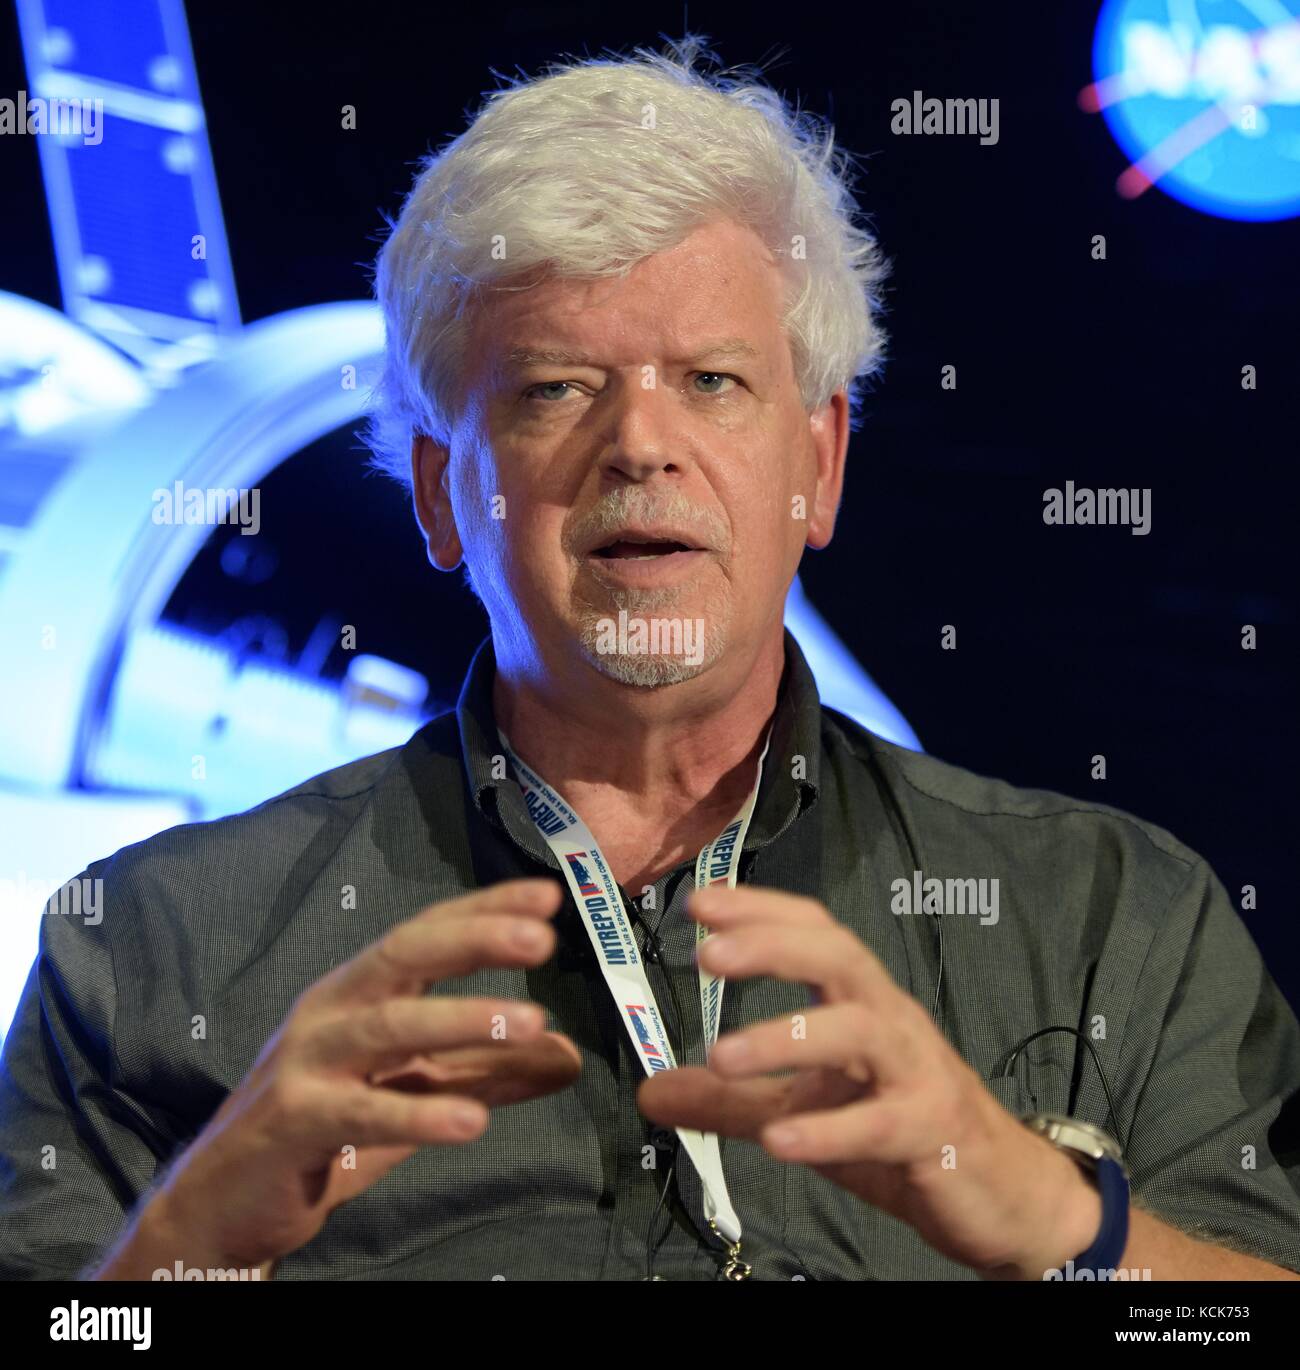 Honeybee Robotics Co-Founder Stephen Gorevan speaks during the Intrepid Space and Science Festival Big Picture panel discussion at the Intrepid Sea, Air and Space Museum August 5, 2017 in New York City, New York.  (photo by Bill Ingalls  via Planetpix) Stock Photo